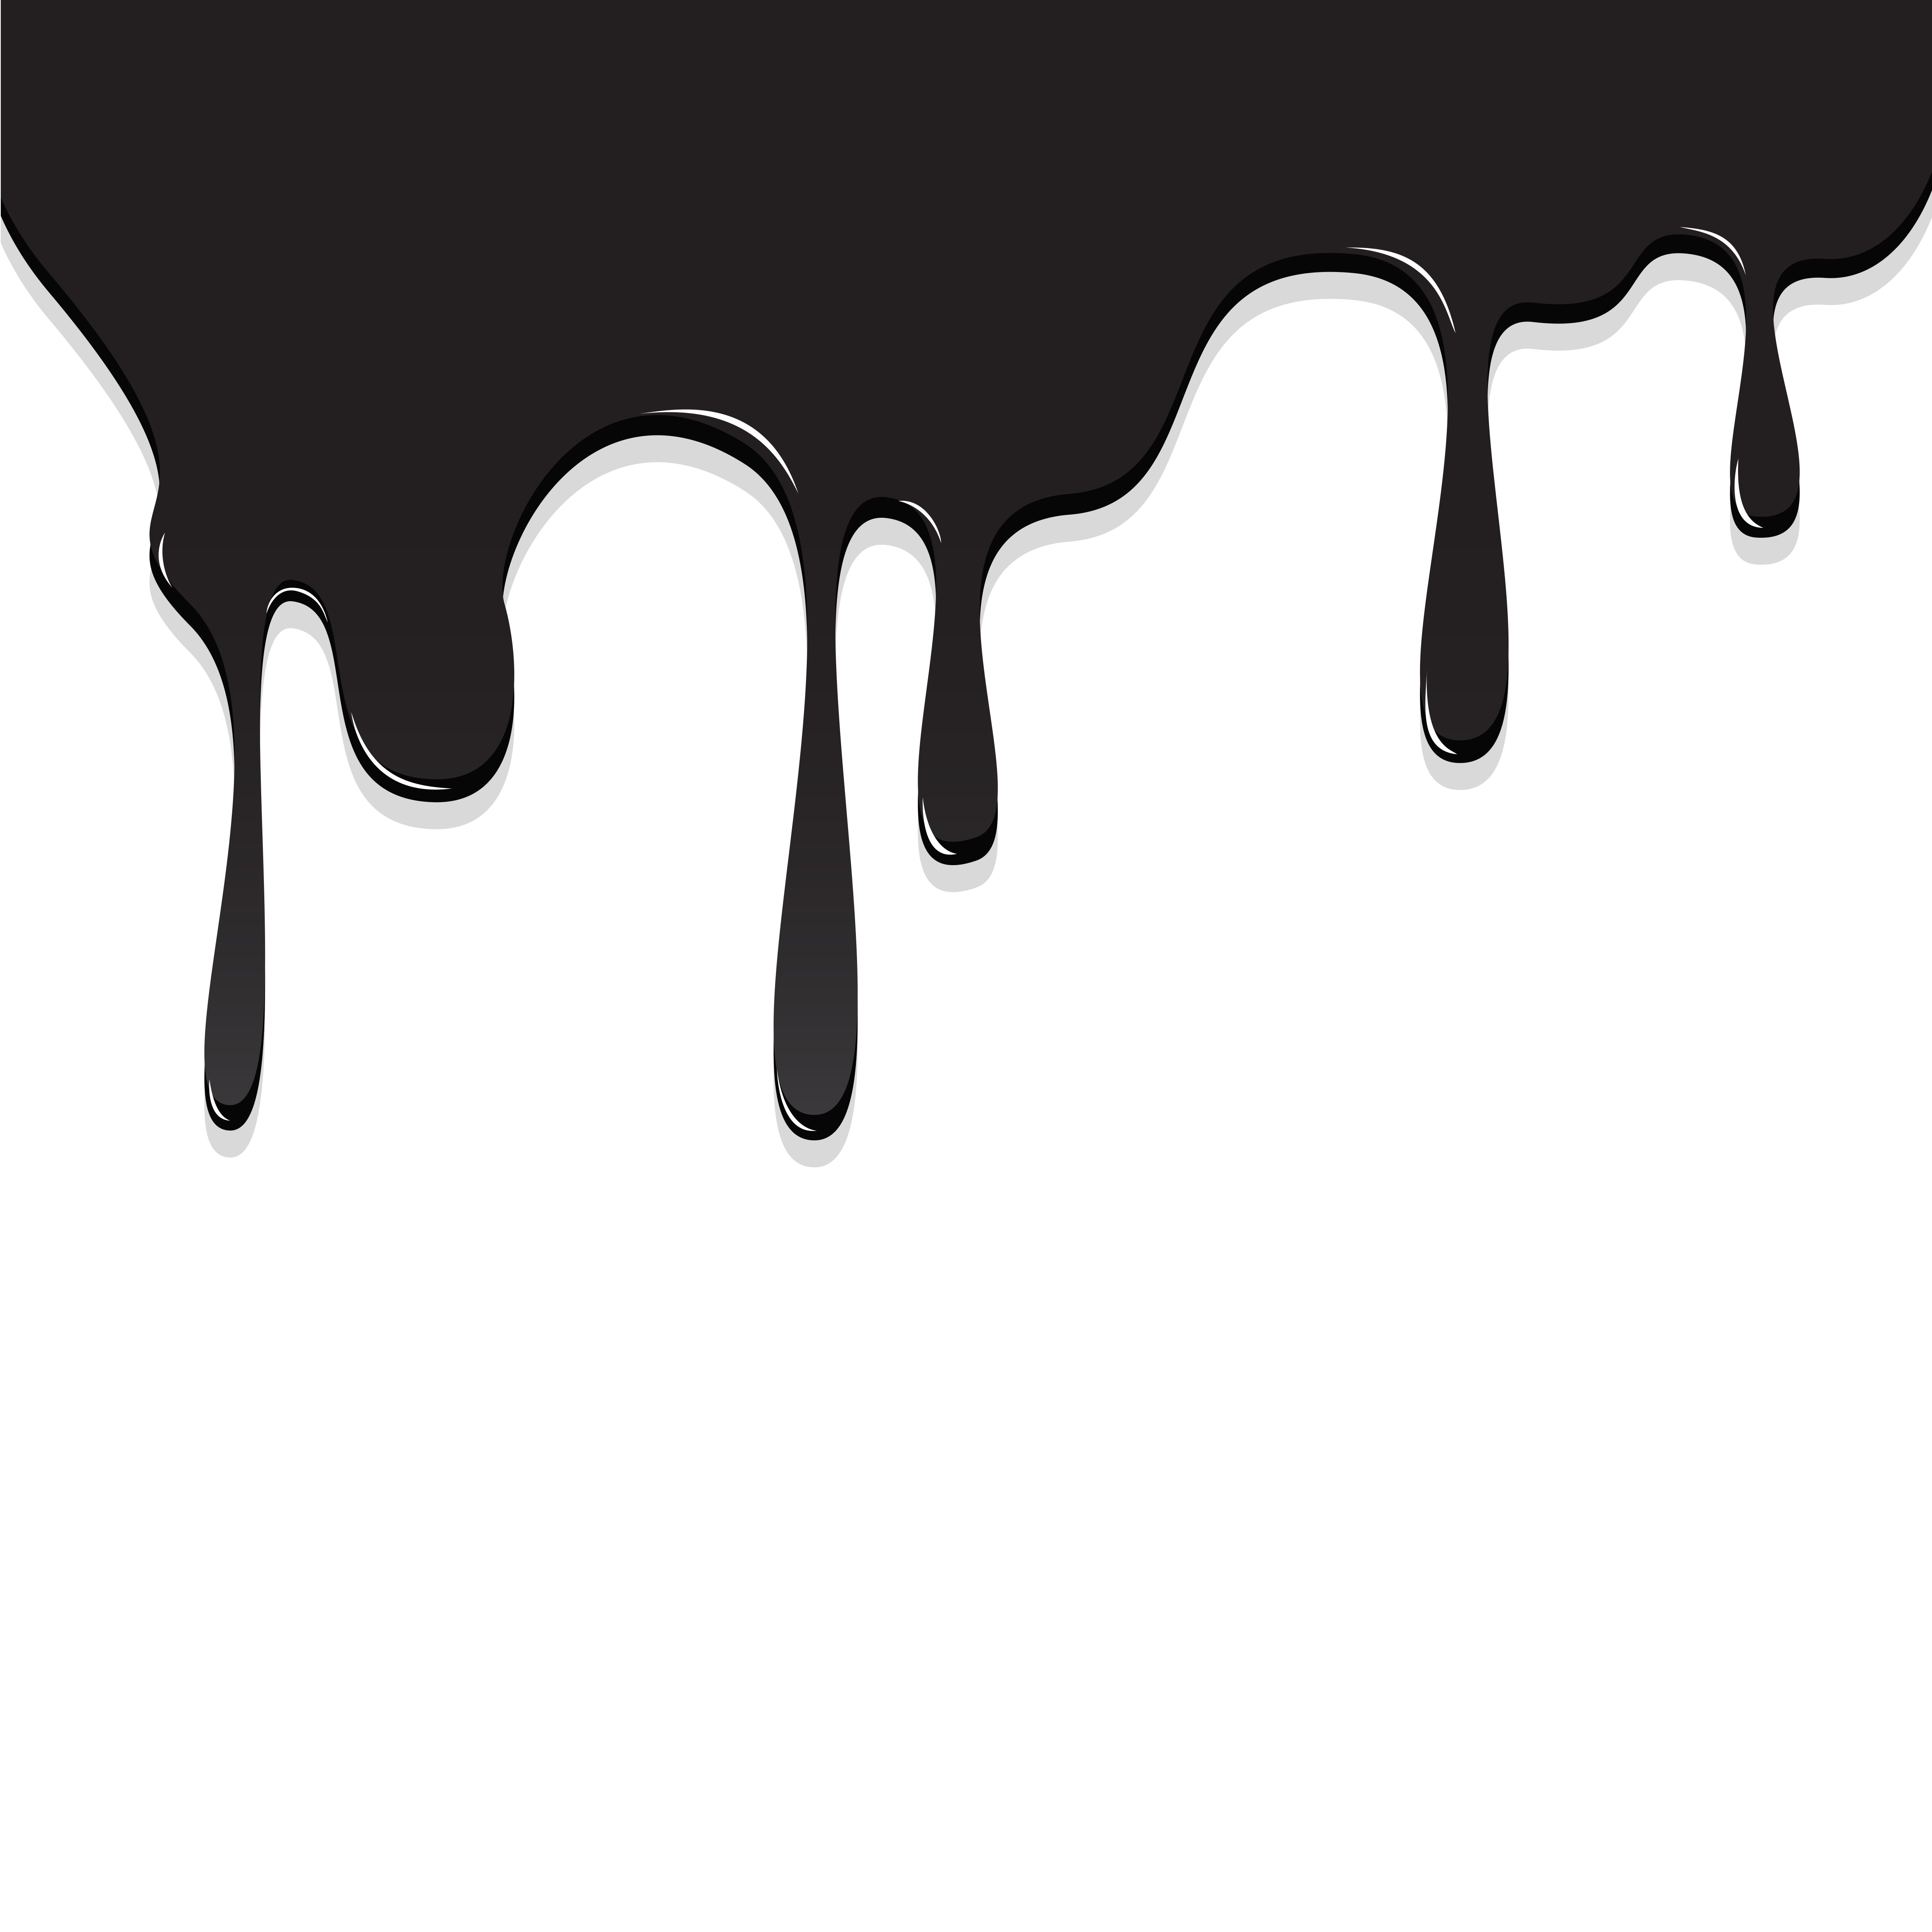 Download Paint Black color dripping, Color Droping Background illustration Vector Art. Choose from over. Dripping paint art, Drip painting, Love background image